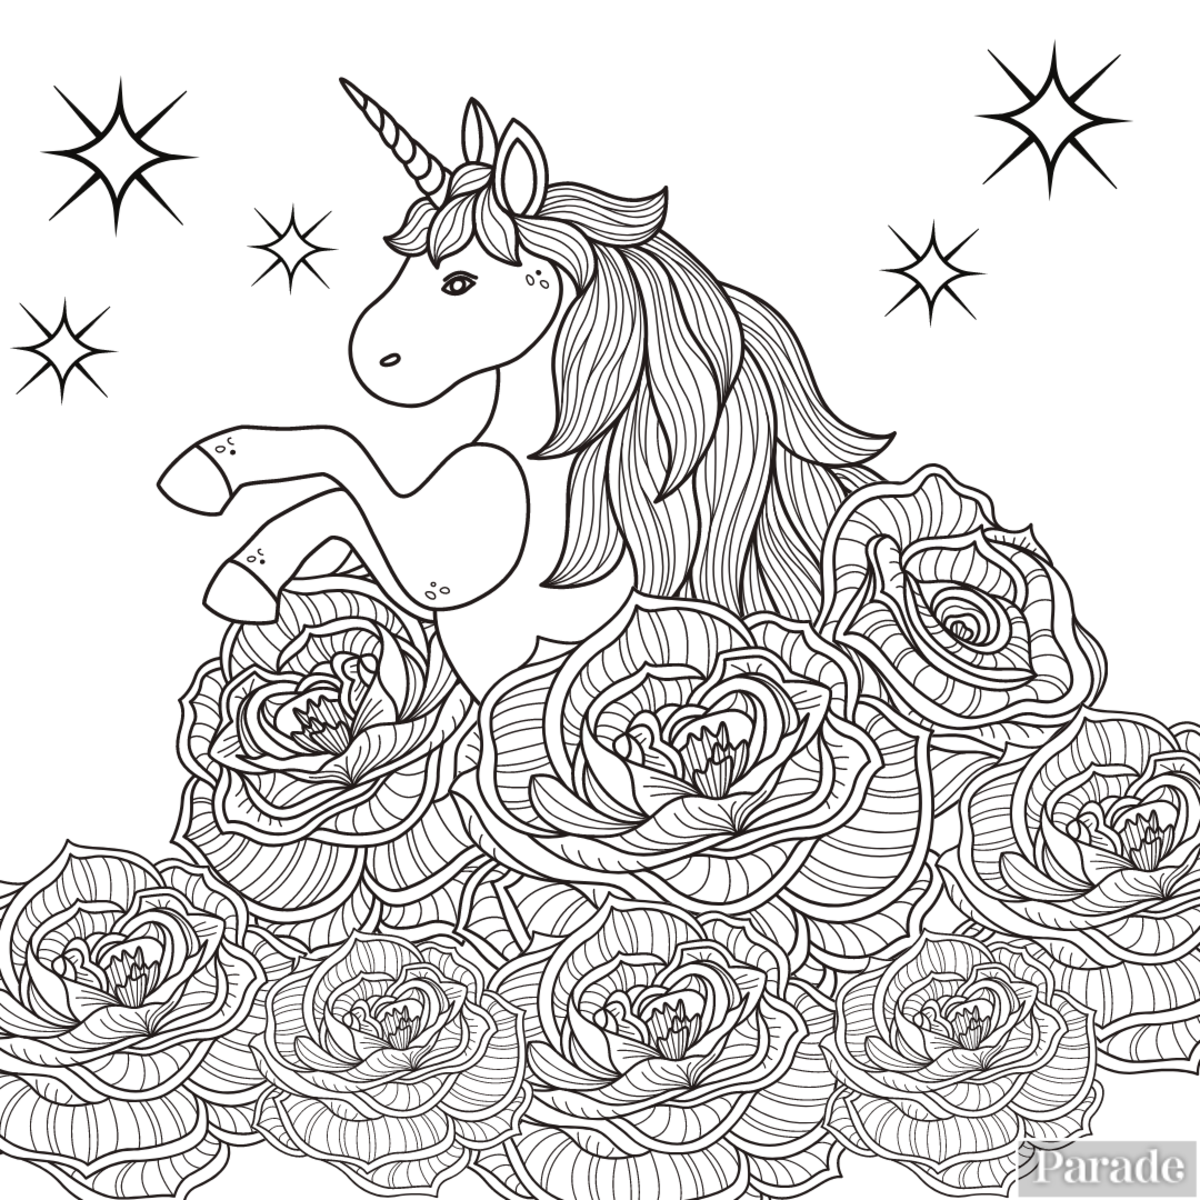 Unicorn coloring pages free printable sheets for kids